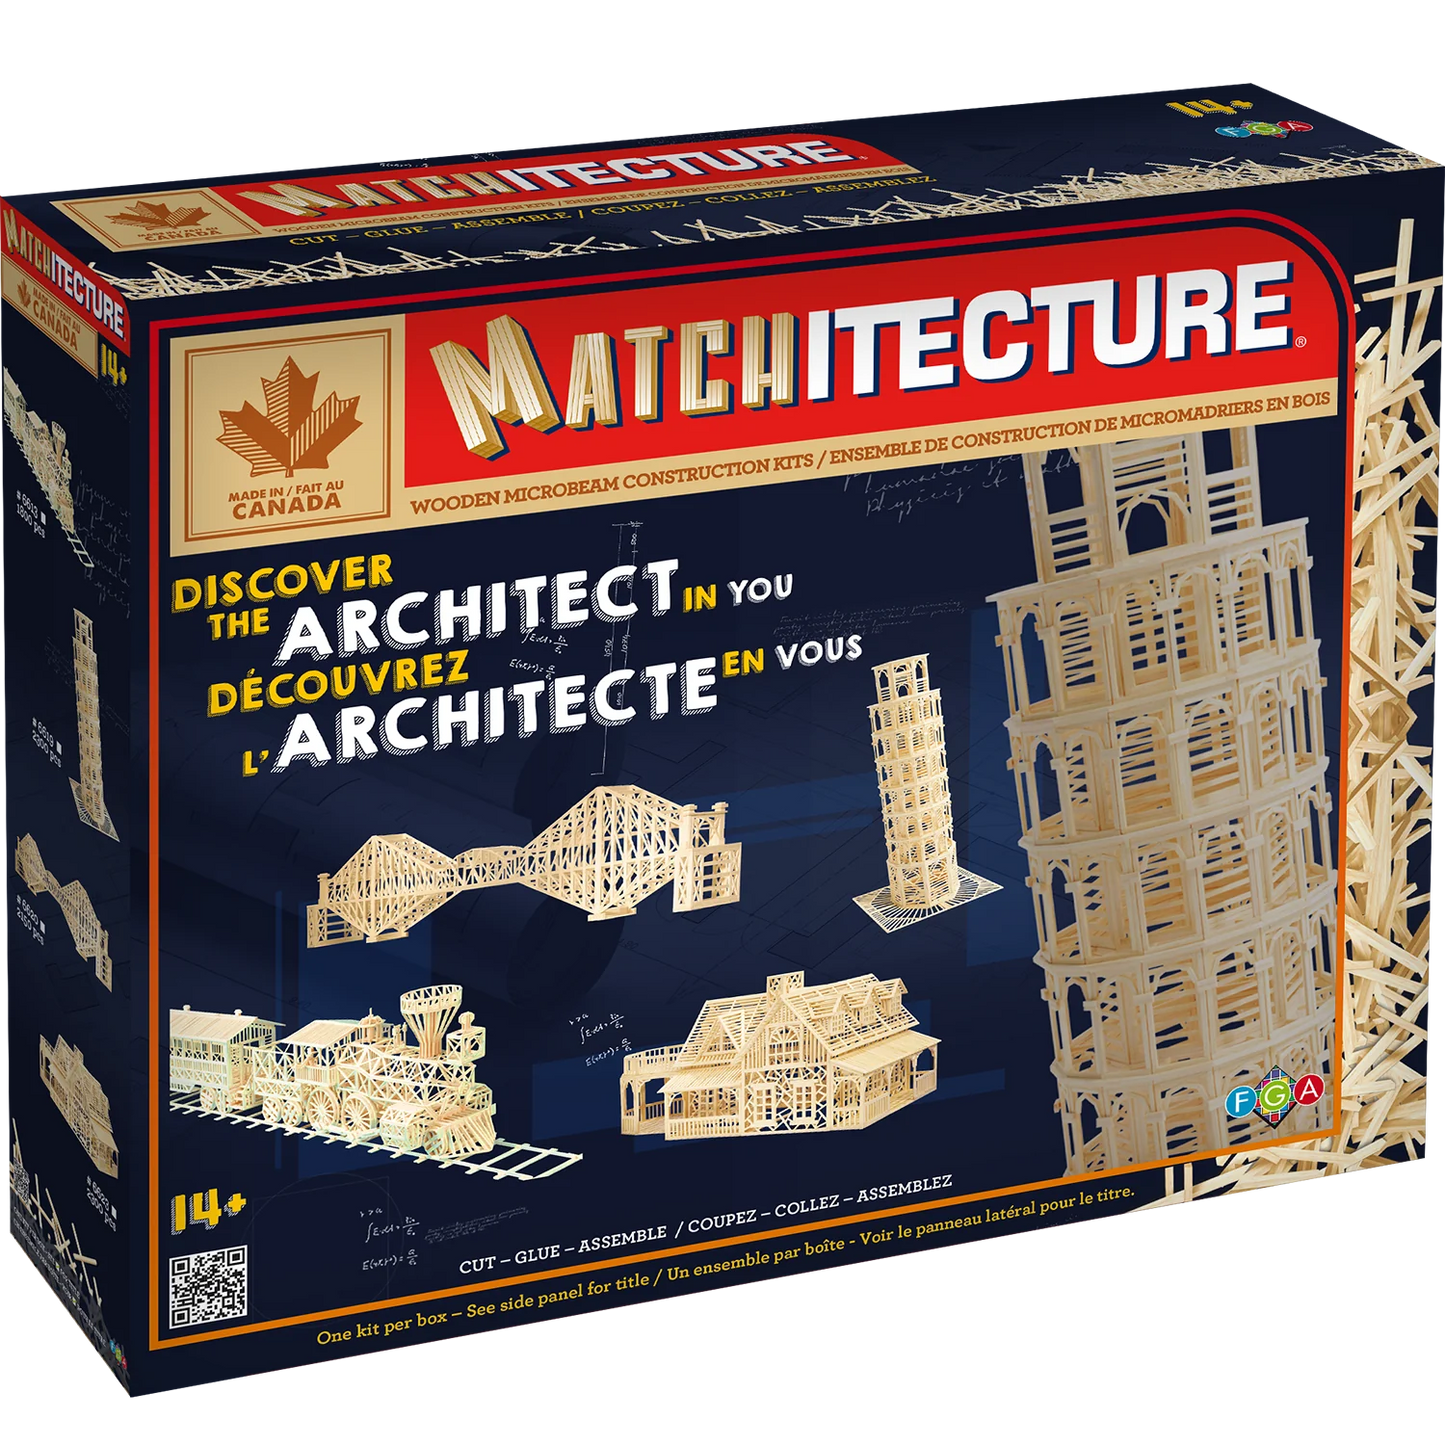 Country house 6623 - Matchitecture